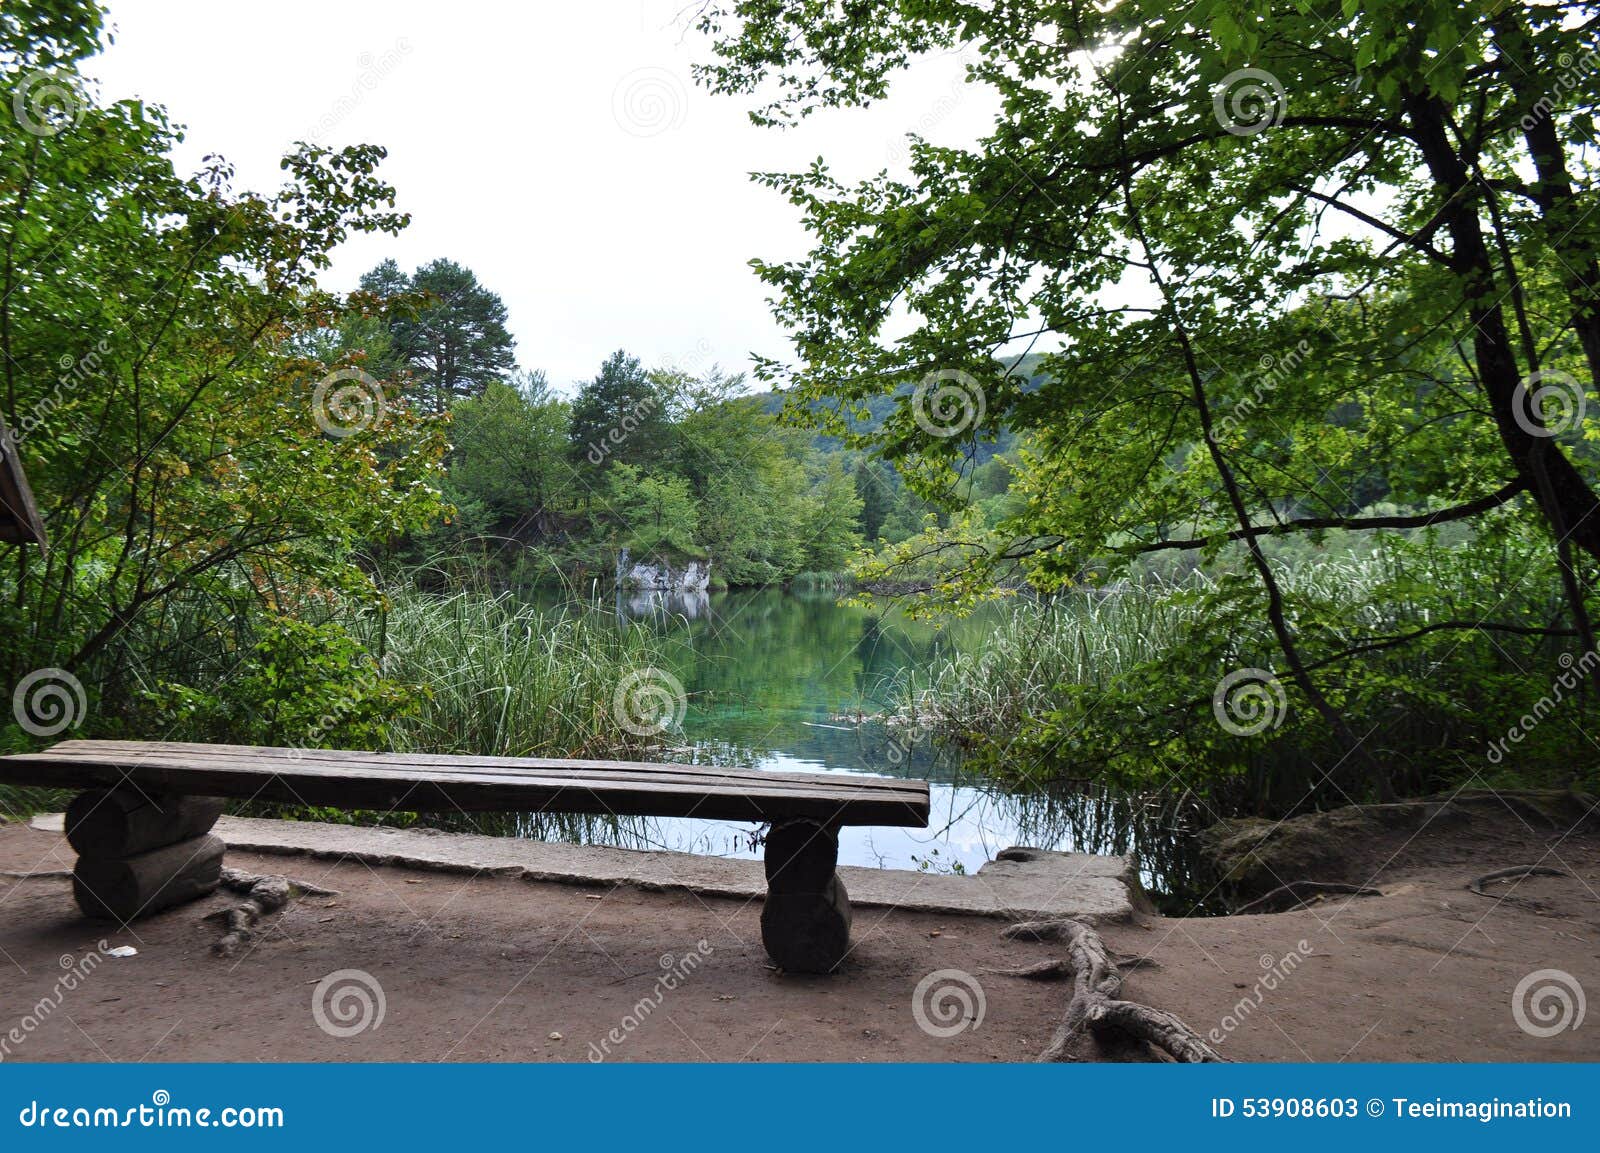 bench looking into green lake and calming scenery